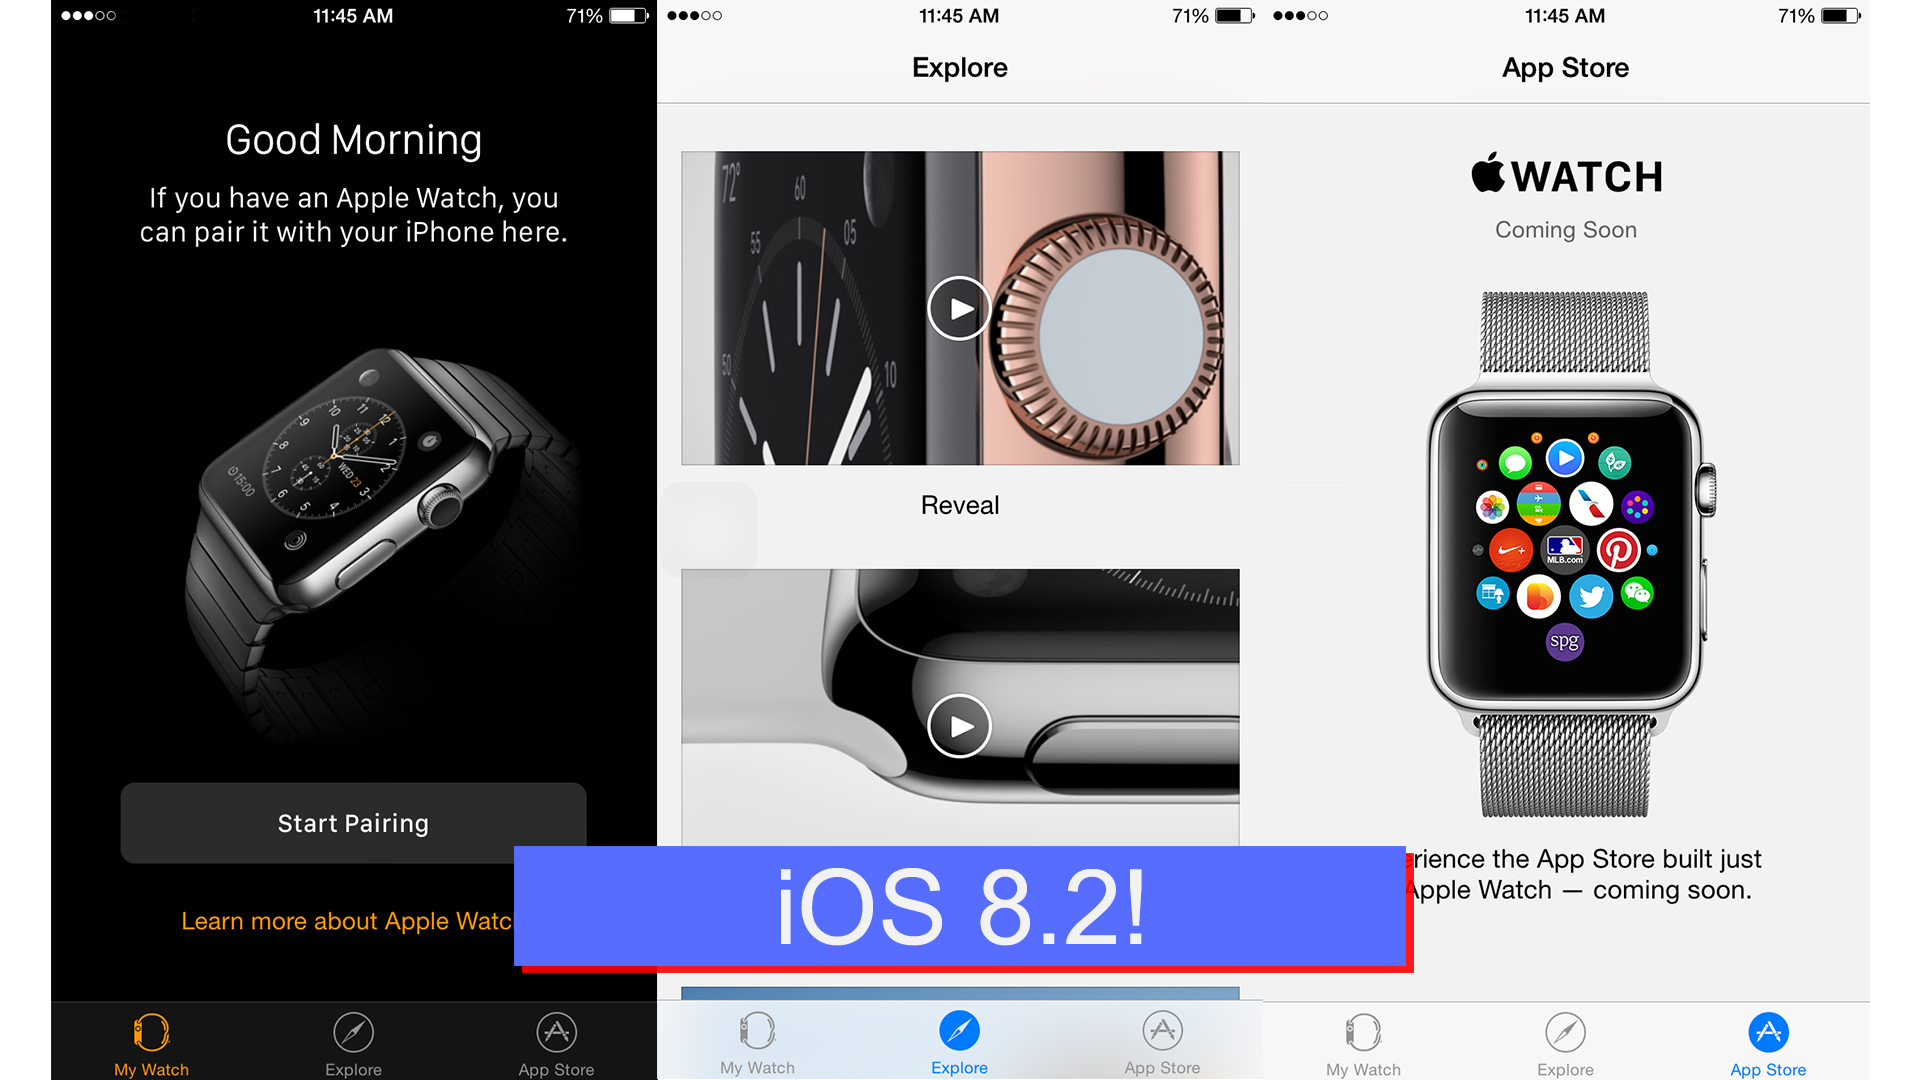 iOS 8.2 is out with a App Store for the Apple Watch!